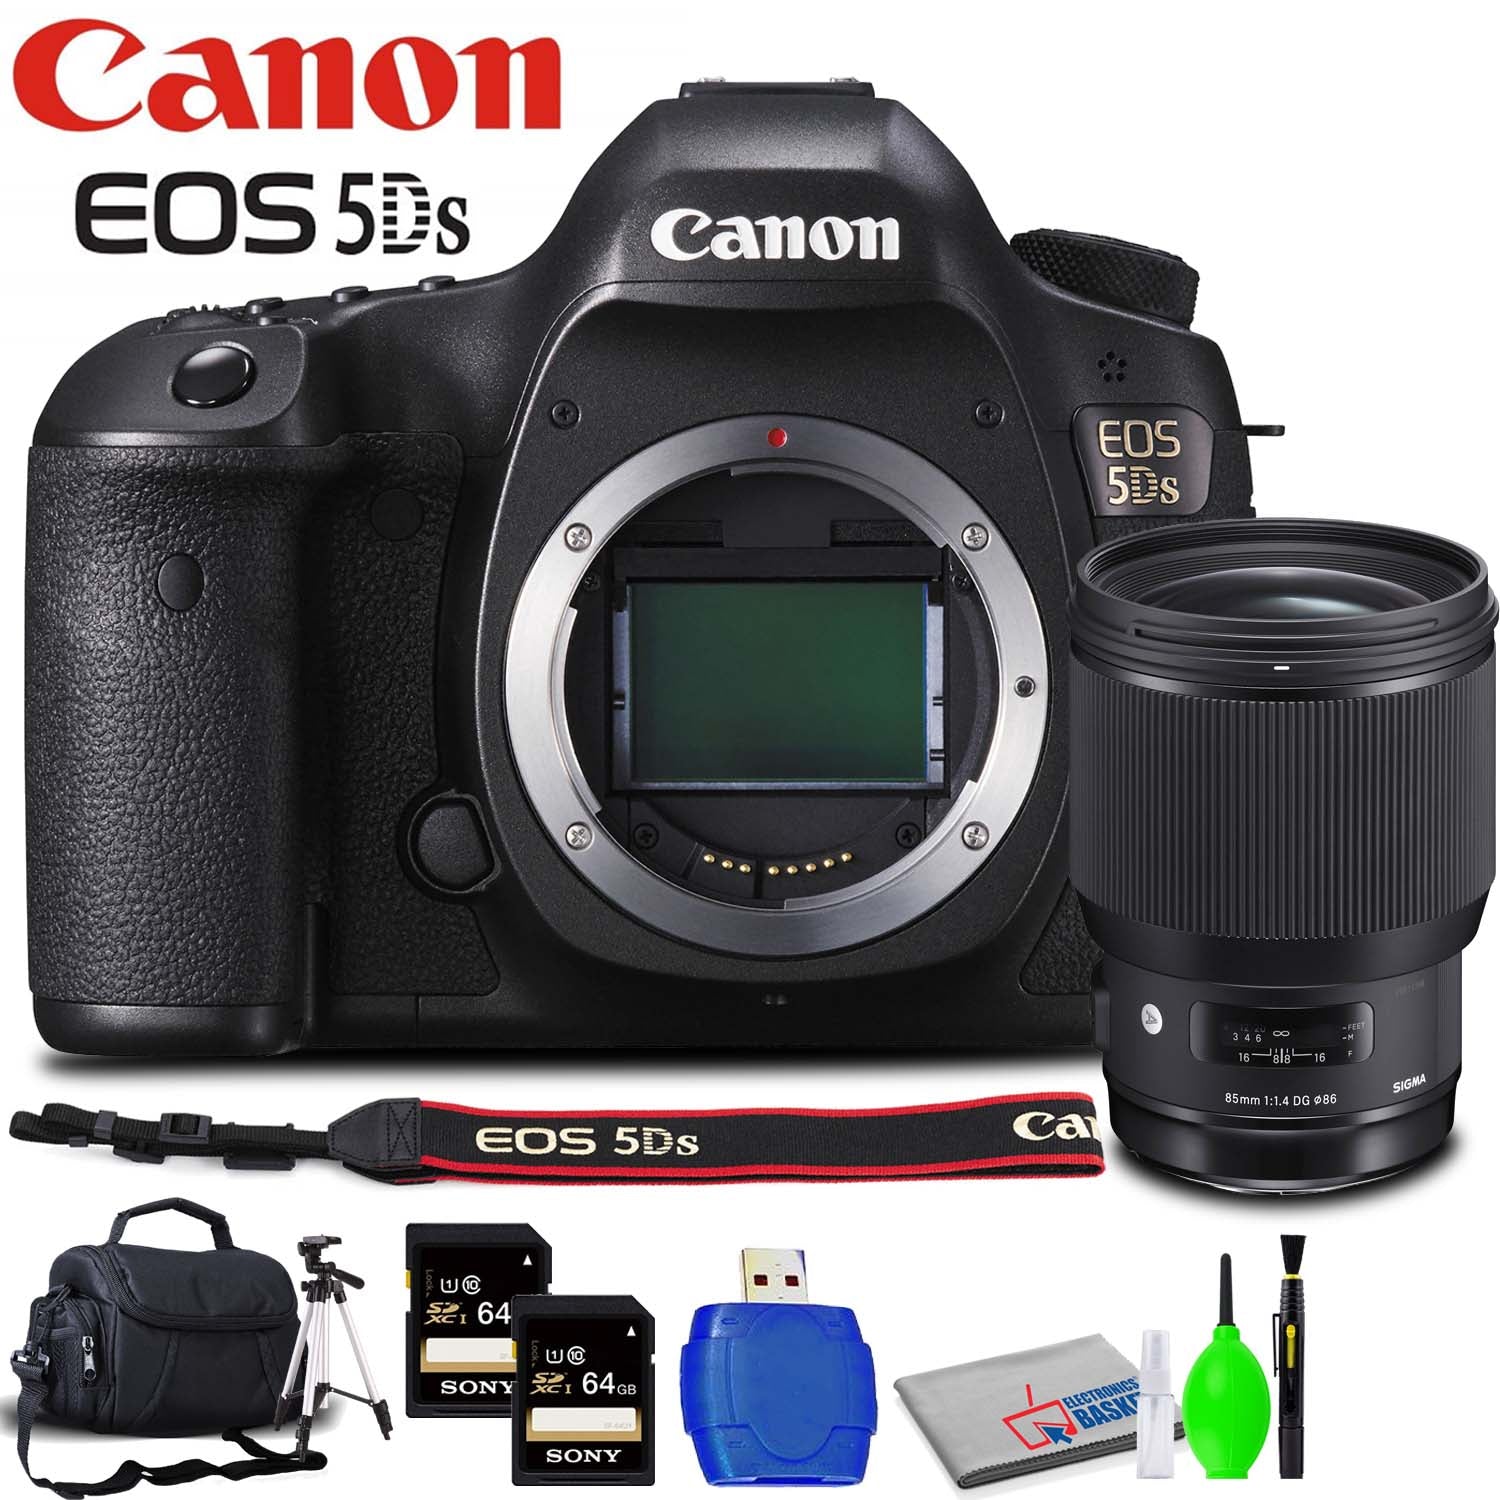 Canon EOS 5DS DSLR Camera (Body Only) Accessory Bundle with Sigma 85mm f/1.4 Lens, Memory Card Kit, Carrying Case, Tripod